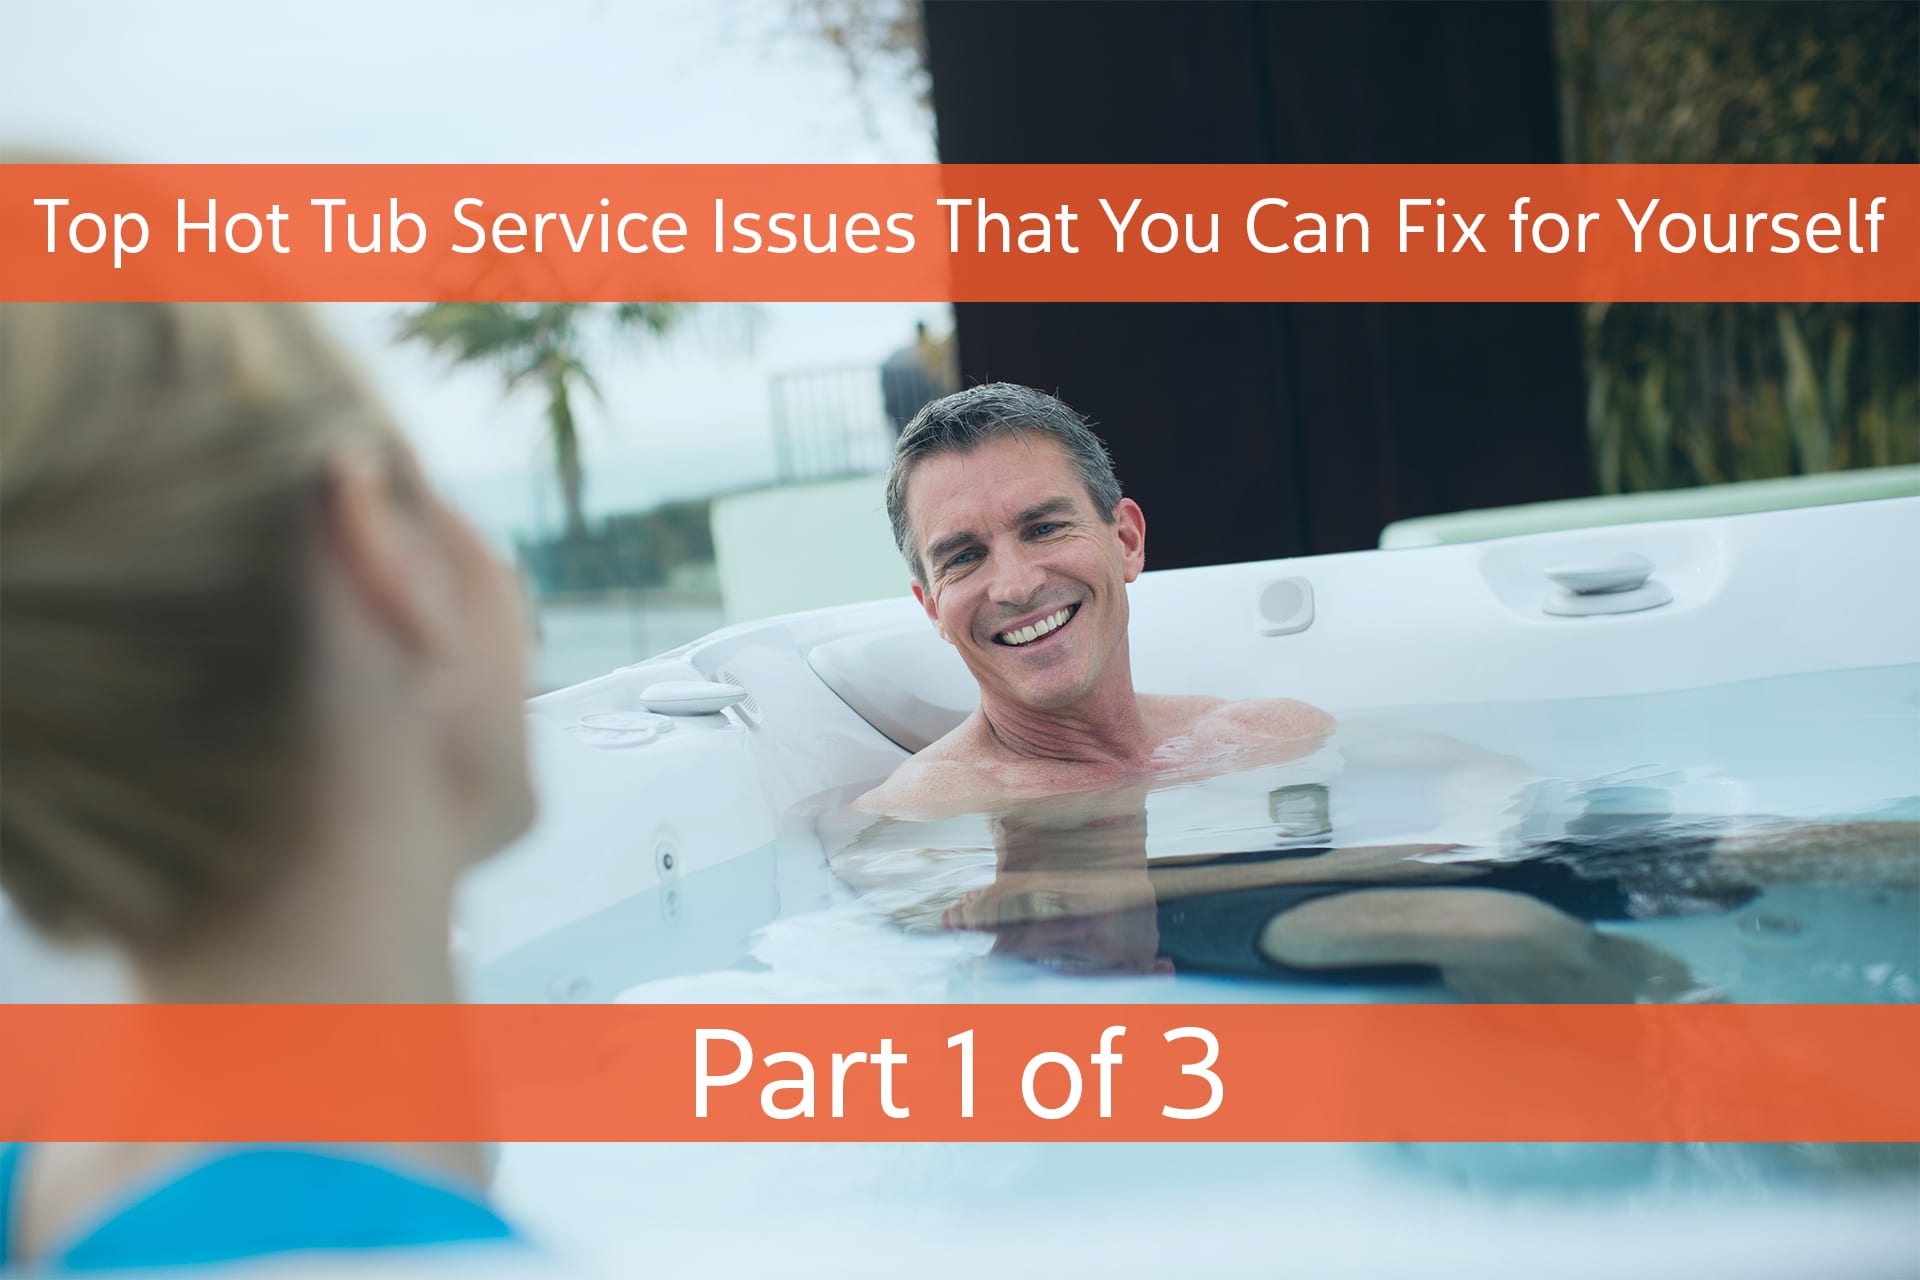 Top Hot Tub Service Issues That You Can Fix for Yourself – Part 1 of 3